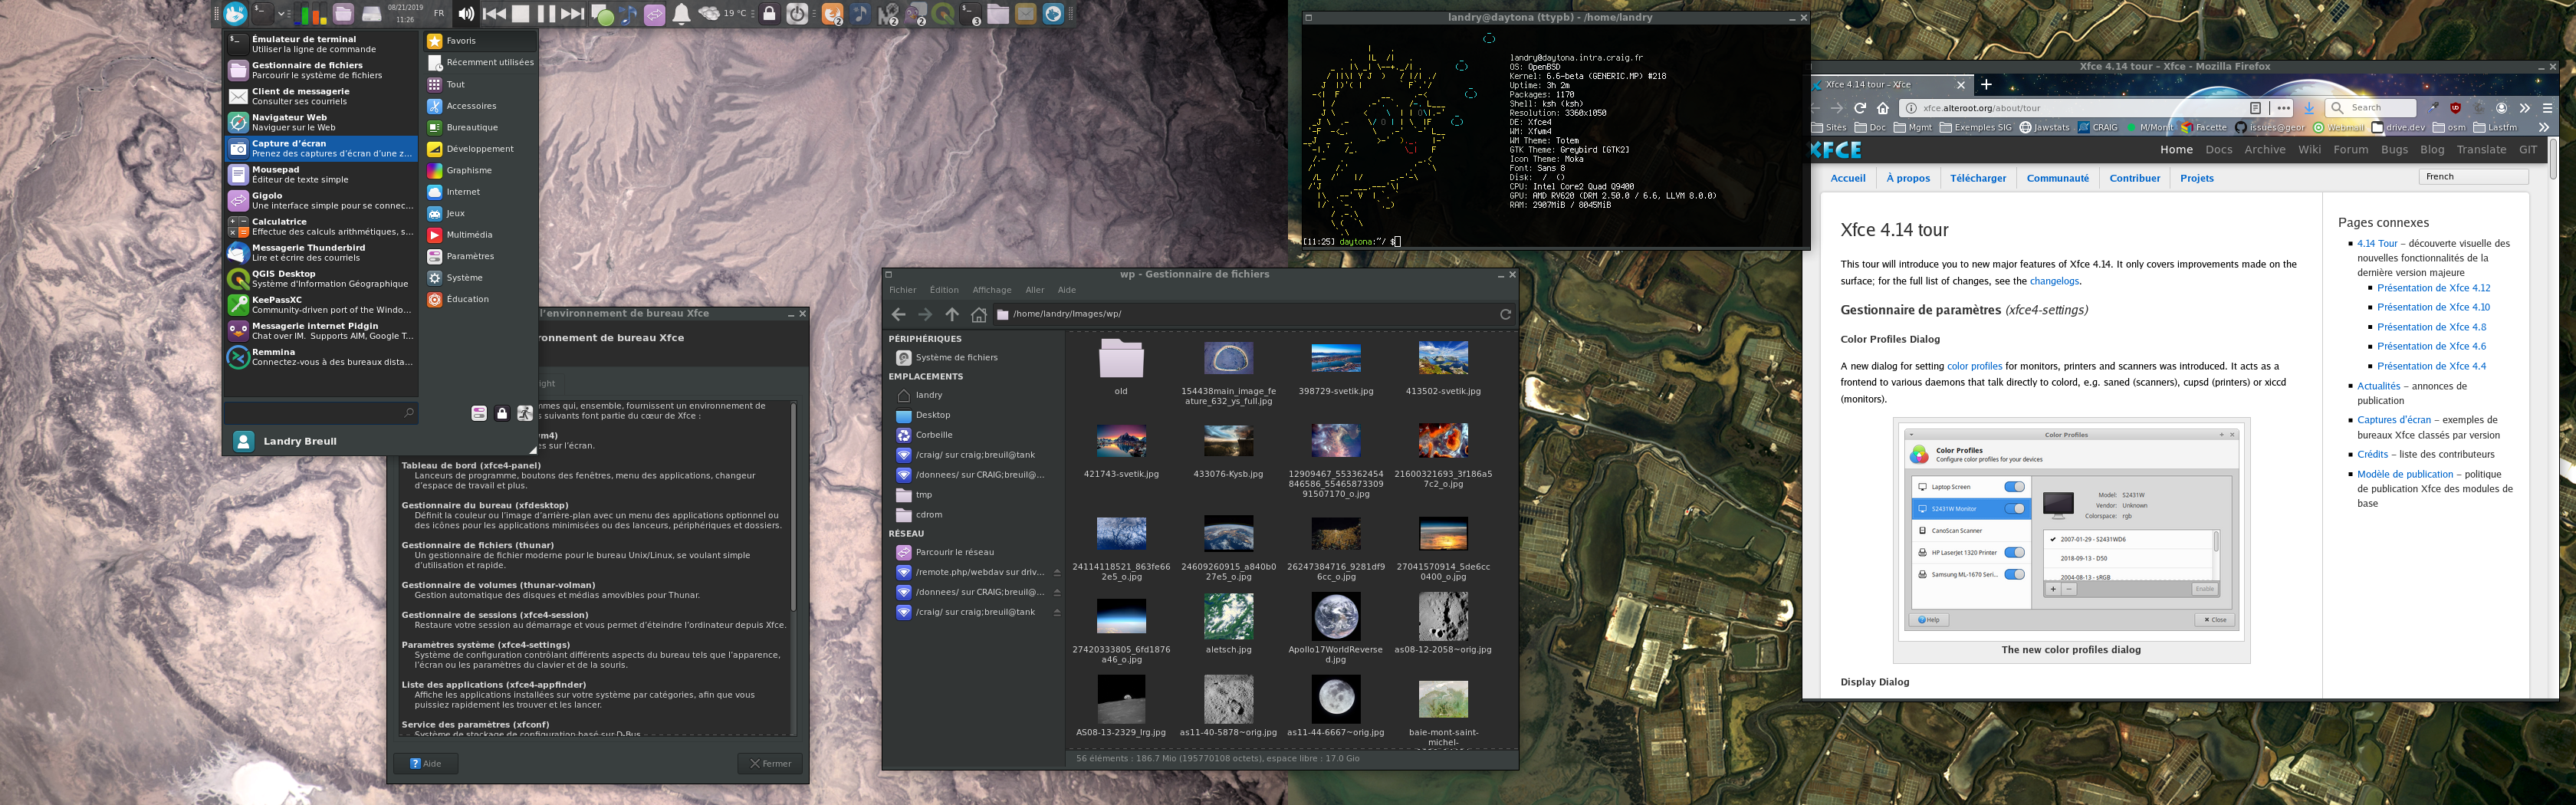 A screenshot of xfce 4.14 with various themes